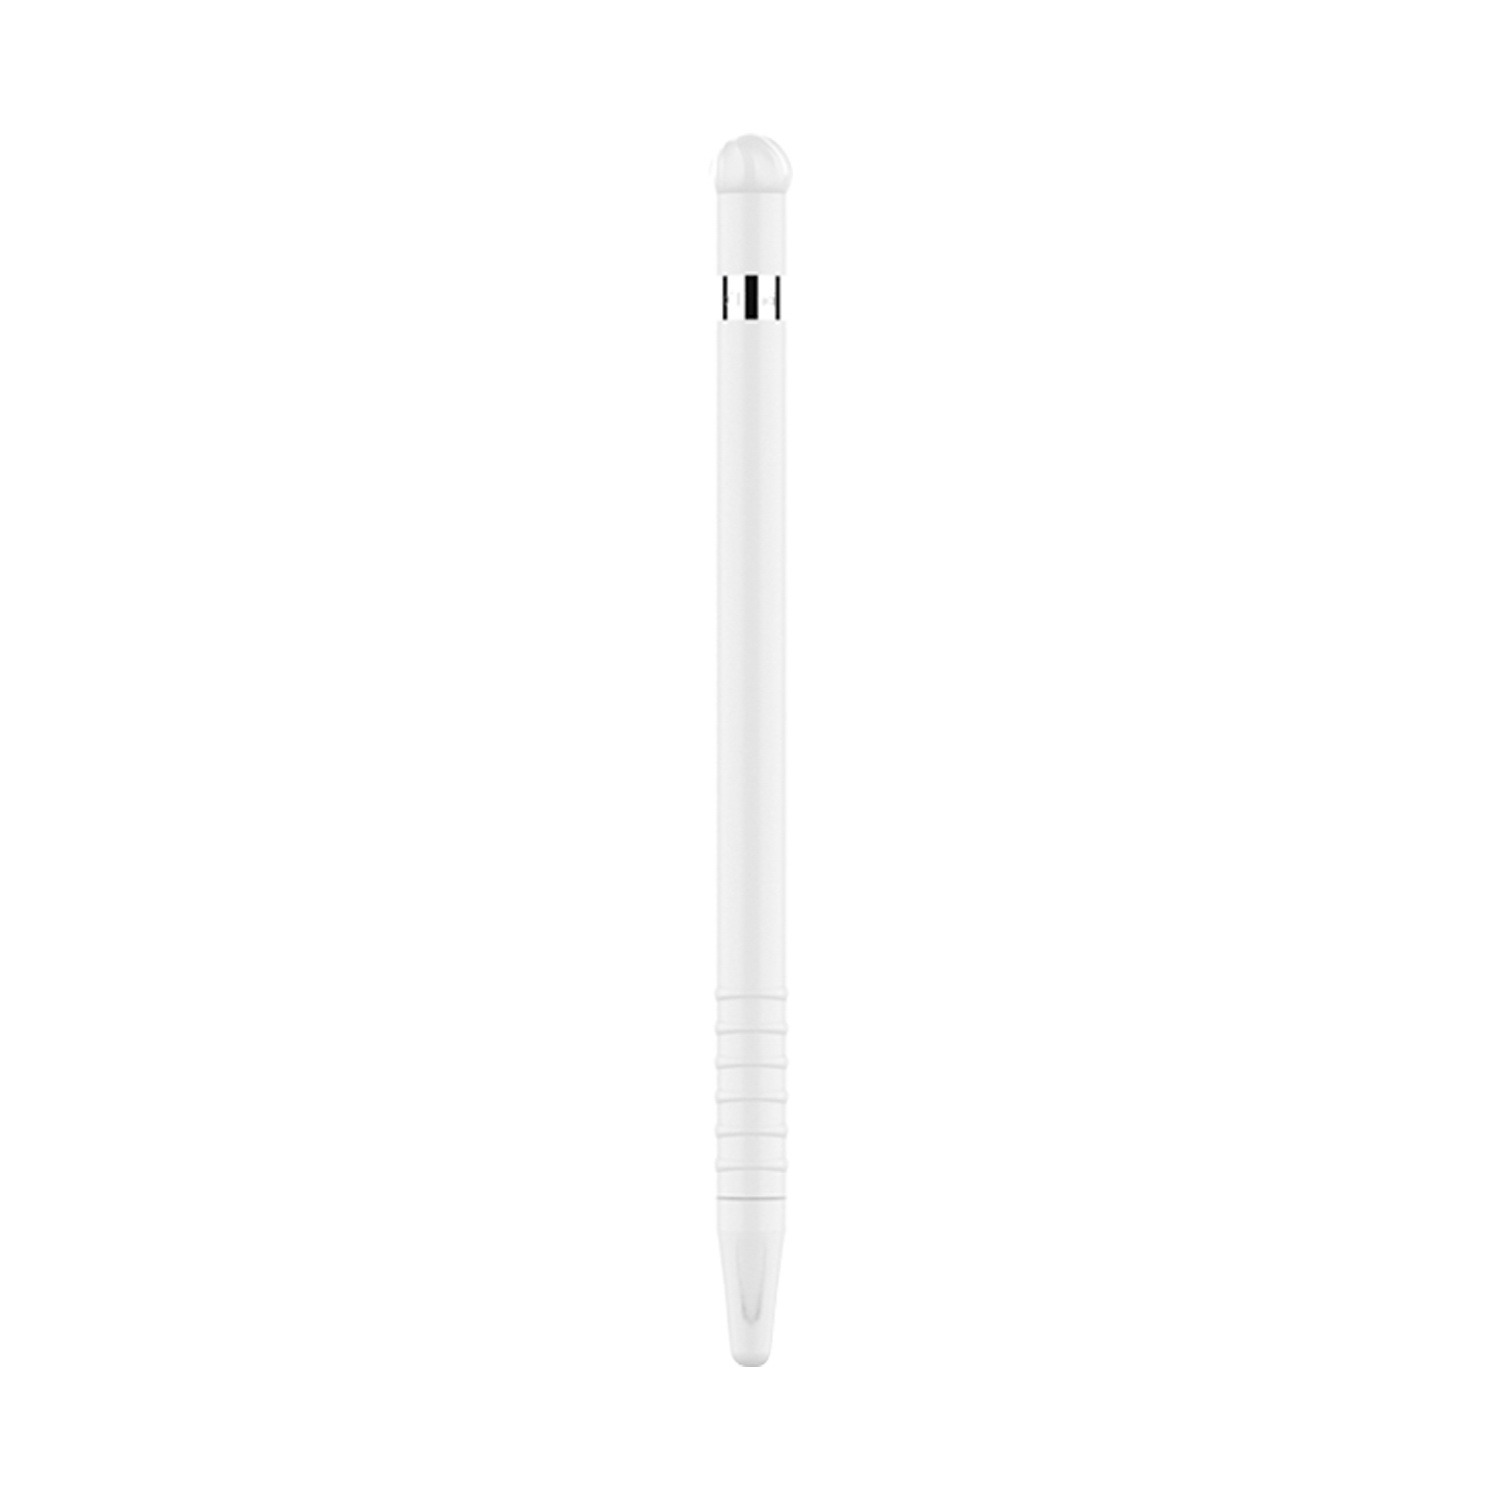 Heals Soft Silicone Case is for Apple Pencil 1st Gen